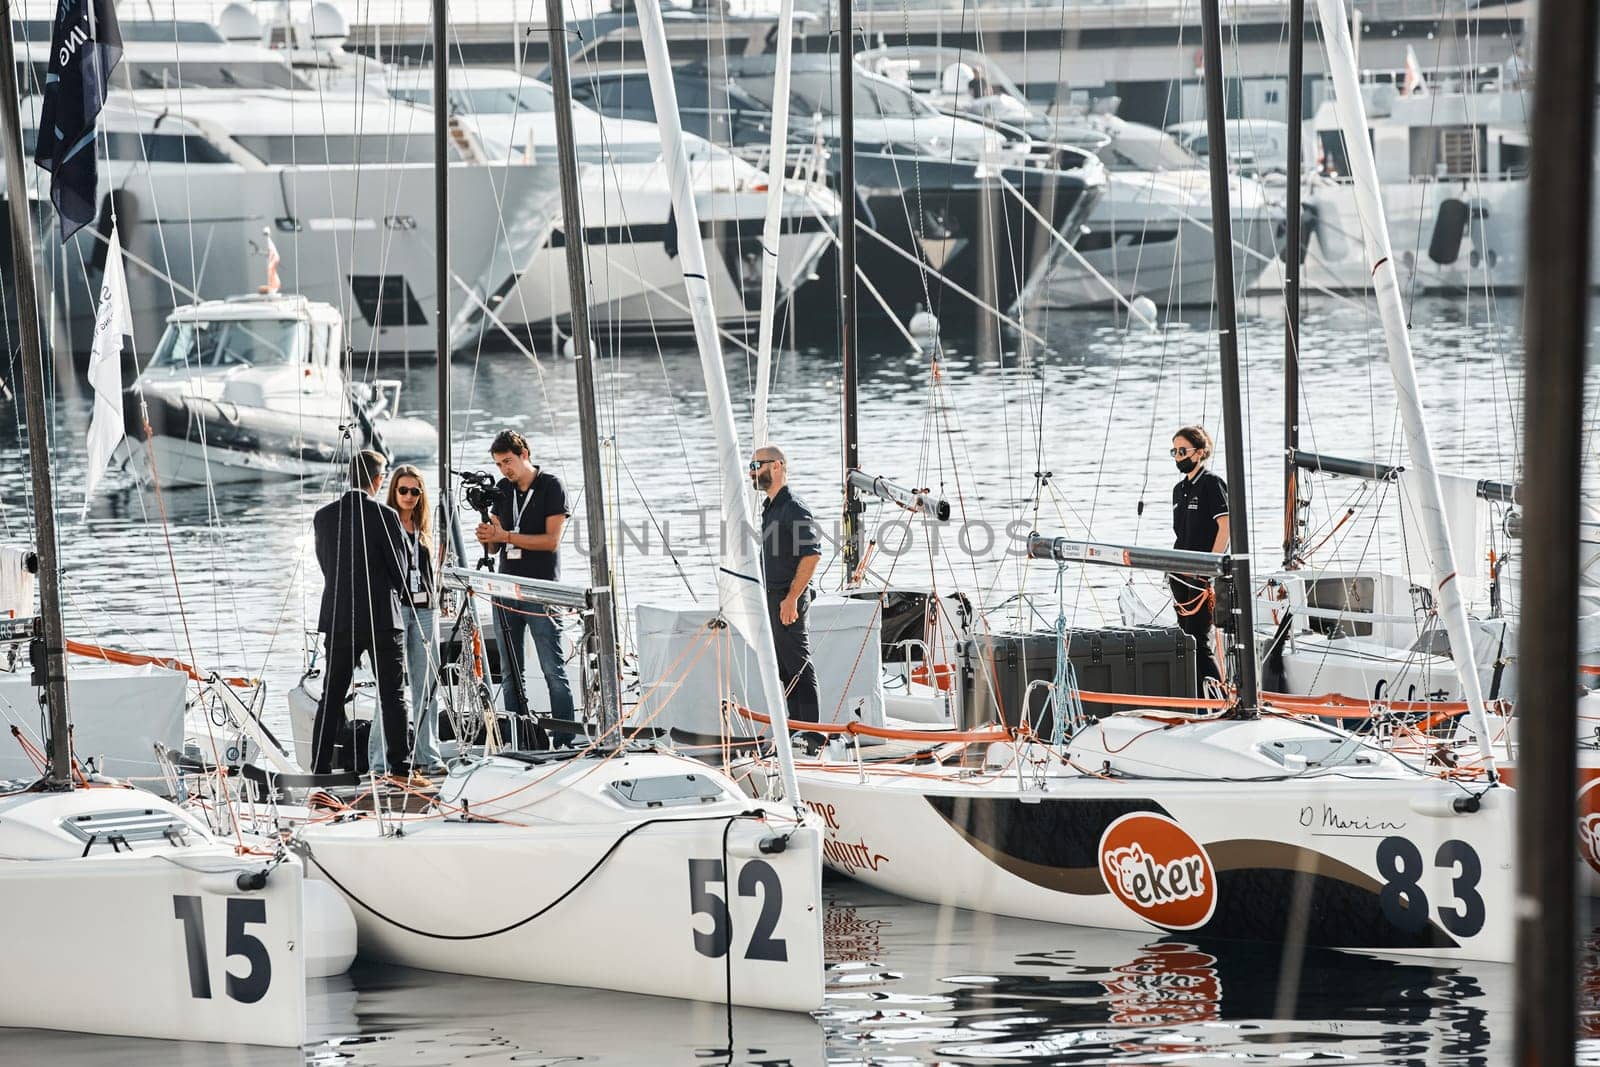 Monaco, Monte-Carlo, 18 October 2022: the film crew interviews the organizer of the regatta on board the boat, the upcoming regatta stage of the World Championship of J70 class, new Yacht Club by vladimirdrozdin